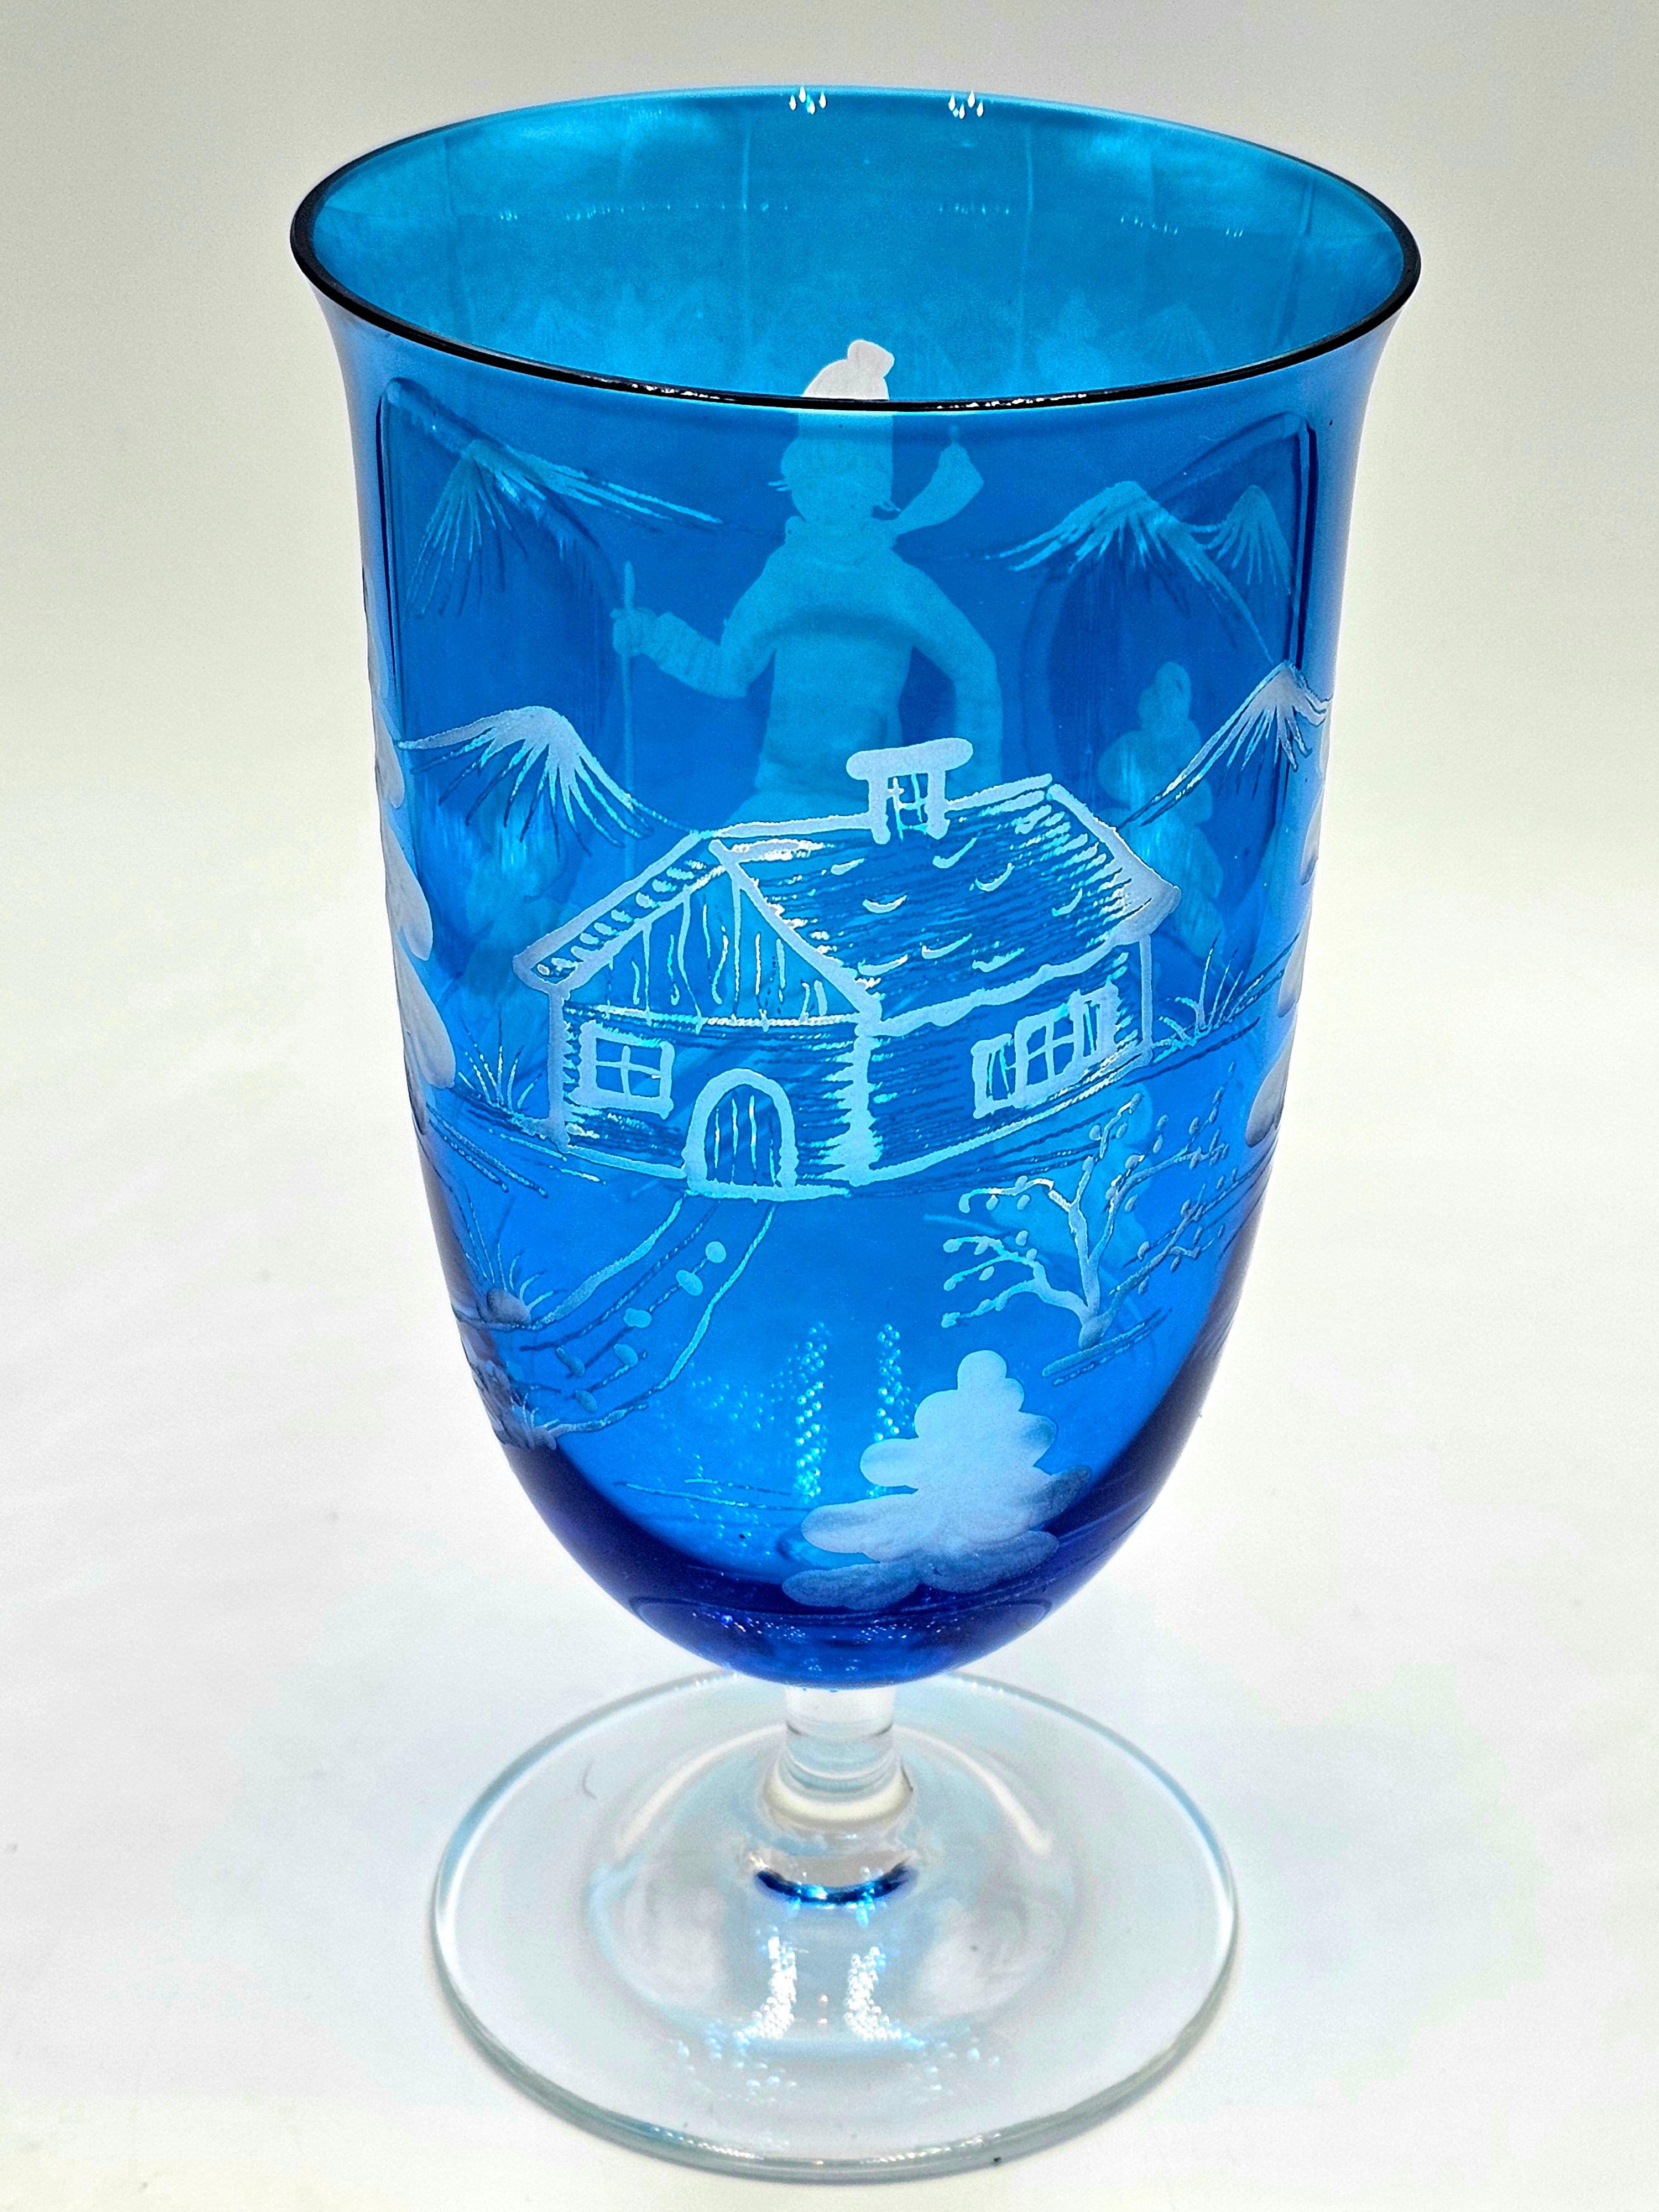 Set of six hand blown crystal glasses in blue with a hand-edged skier decor all around. The decor is a country style decor, showing a skier boy, trees and mountains and a chalet all-over the glass. A matching crystal carafe can be ordered in